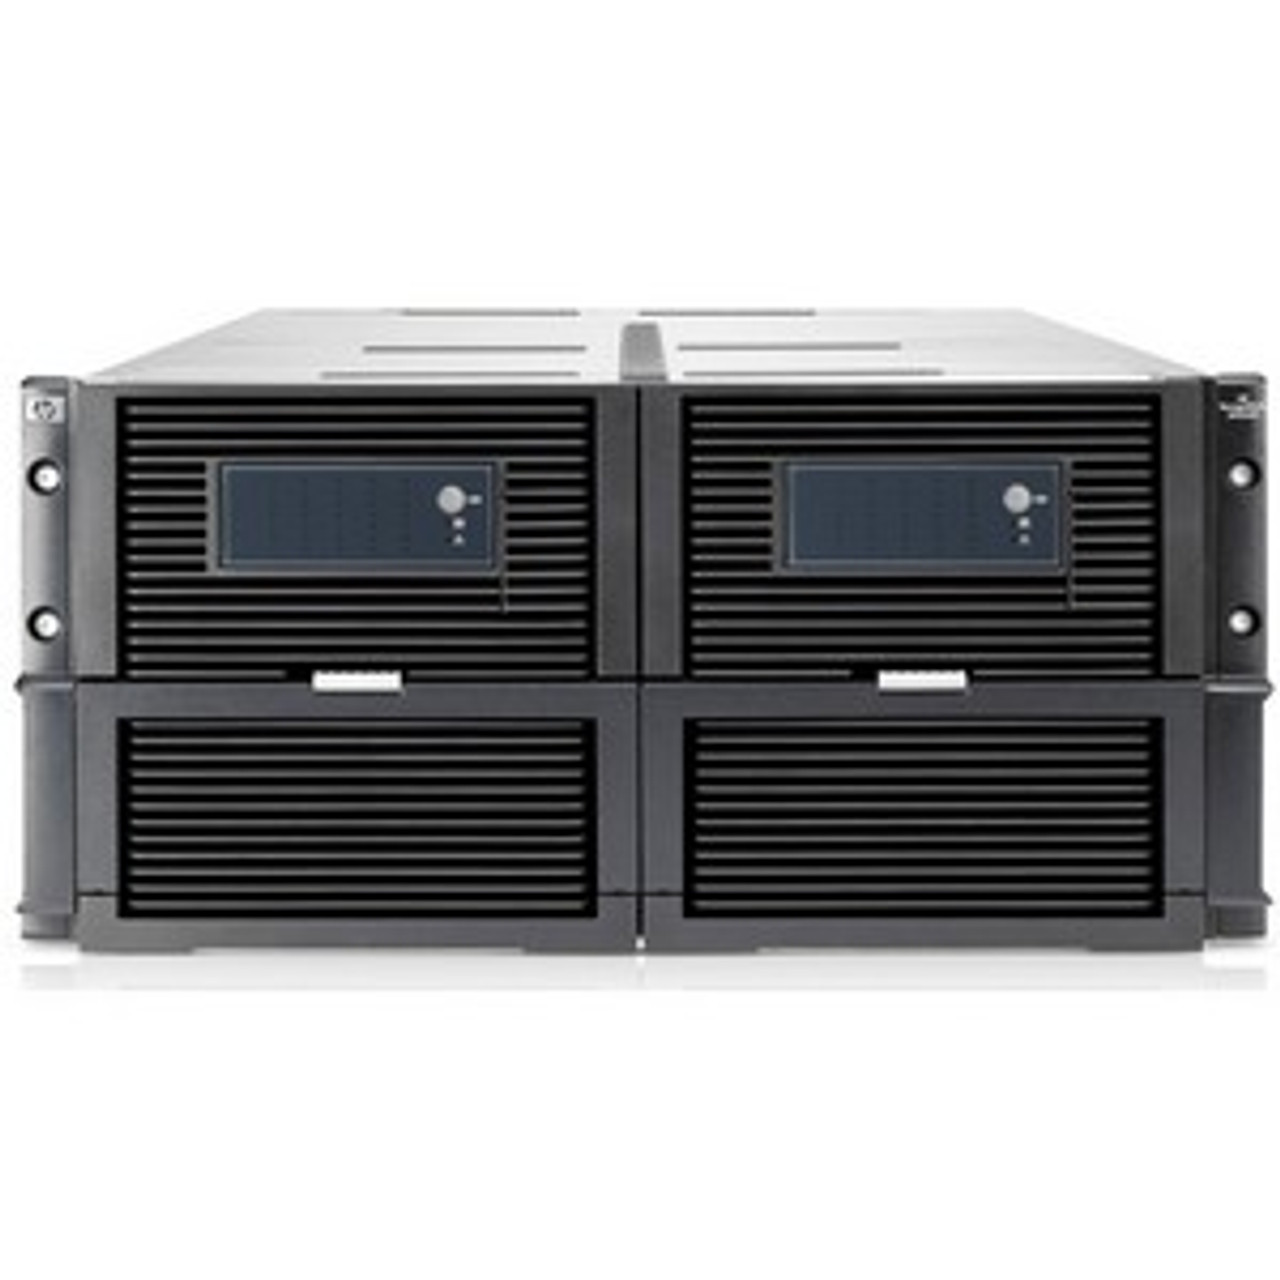 AJ866A - HP StorageWorks Hard Drive Array Serial Attached SCSI (SAS) Controller RAID Supported 70 x Total Bays 5U Rack-mountable